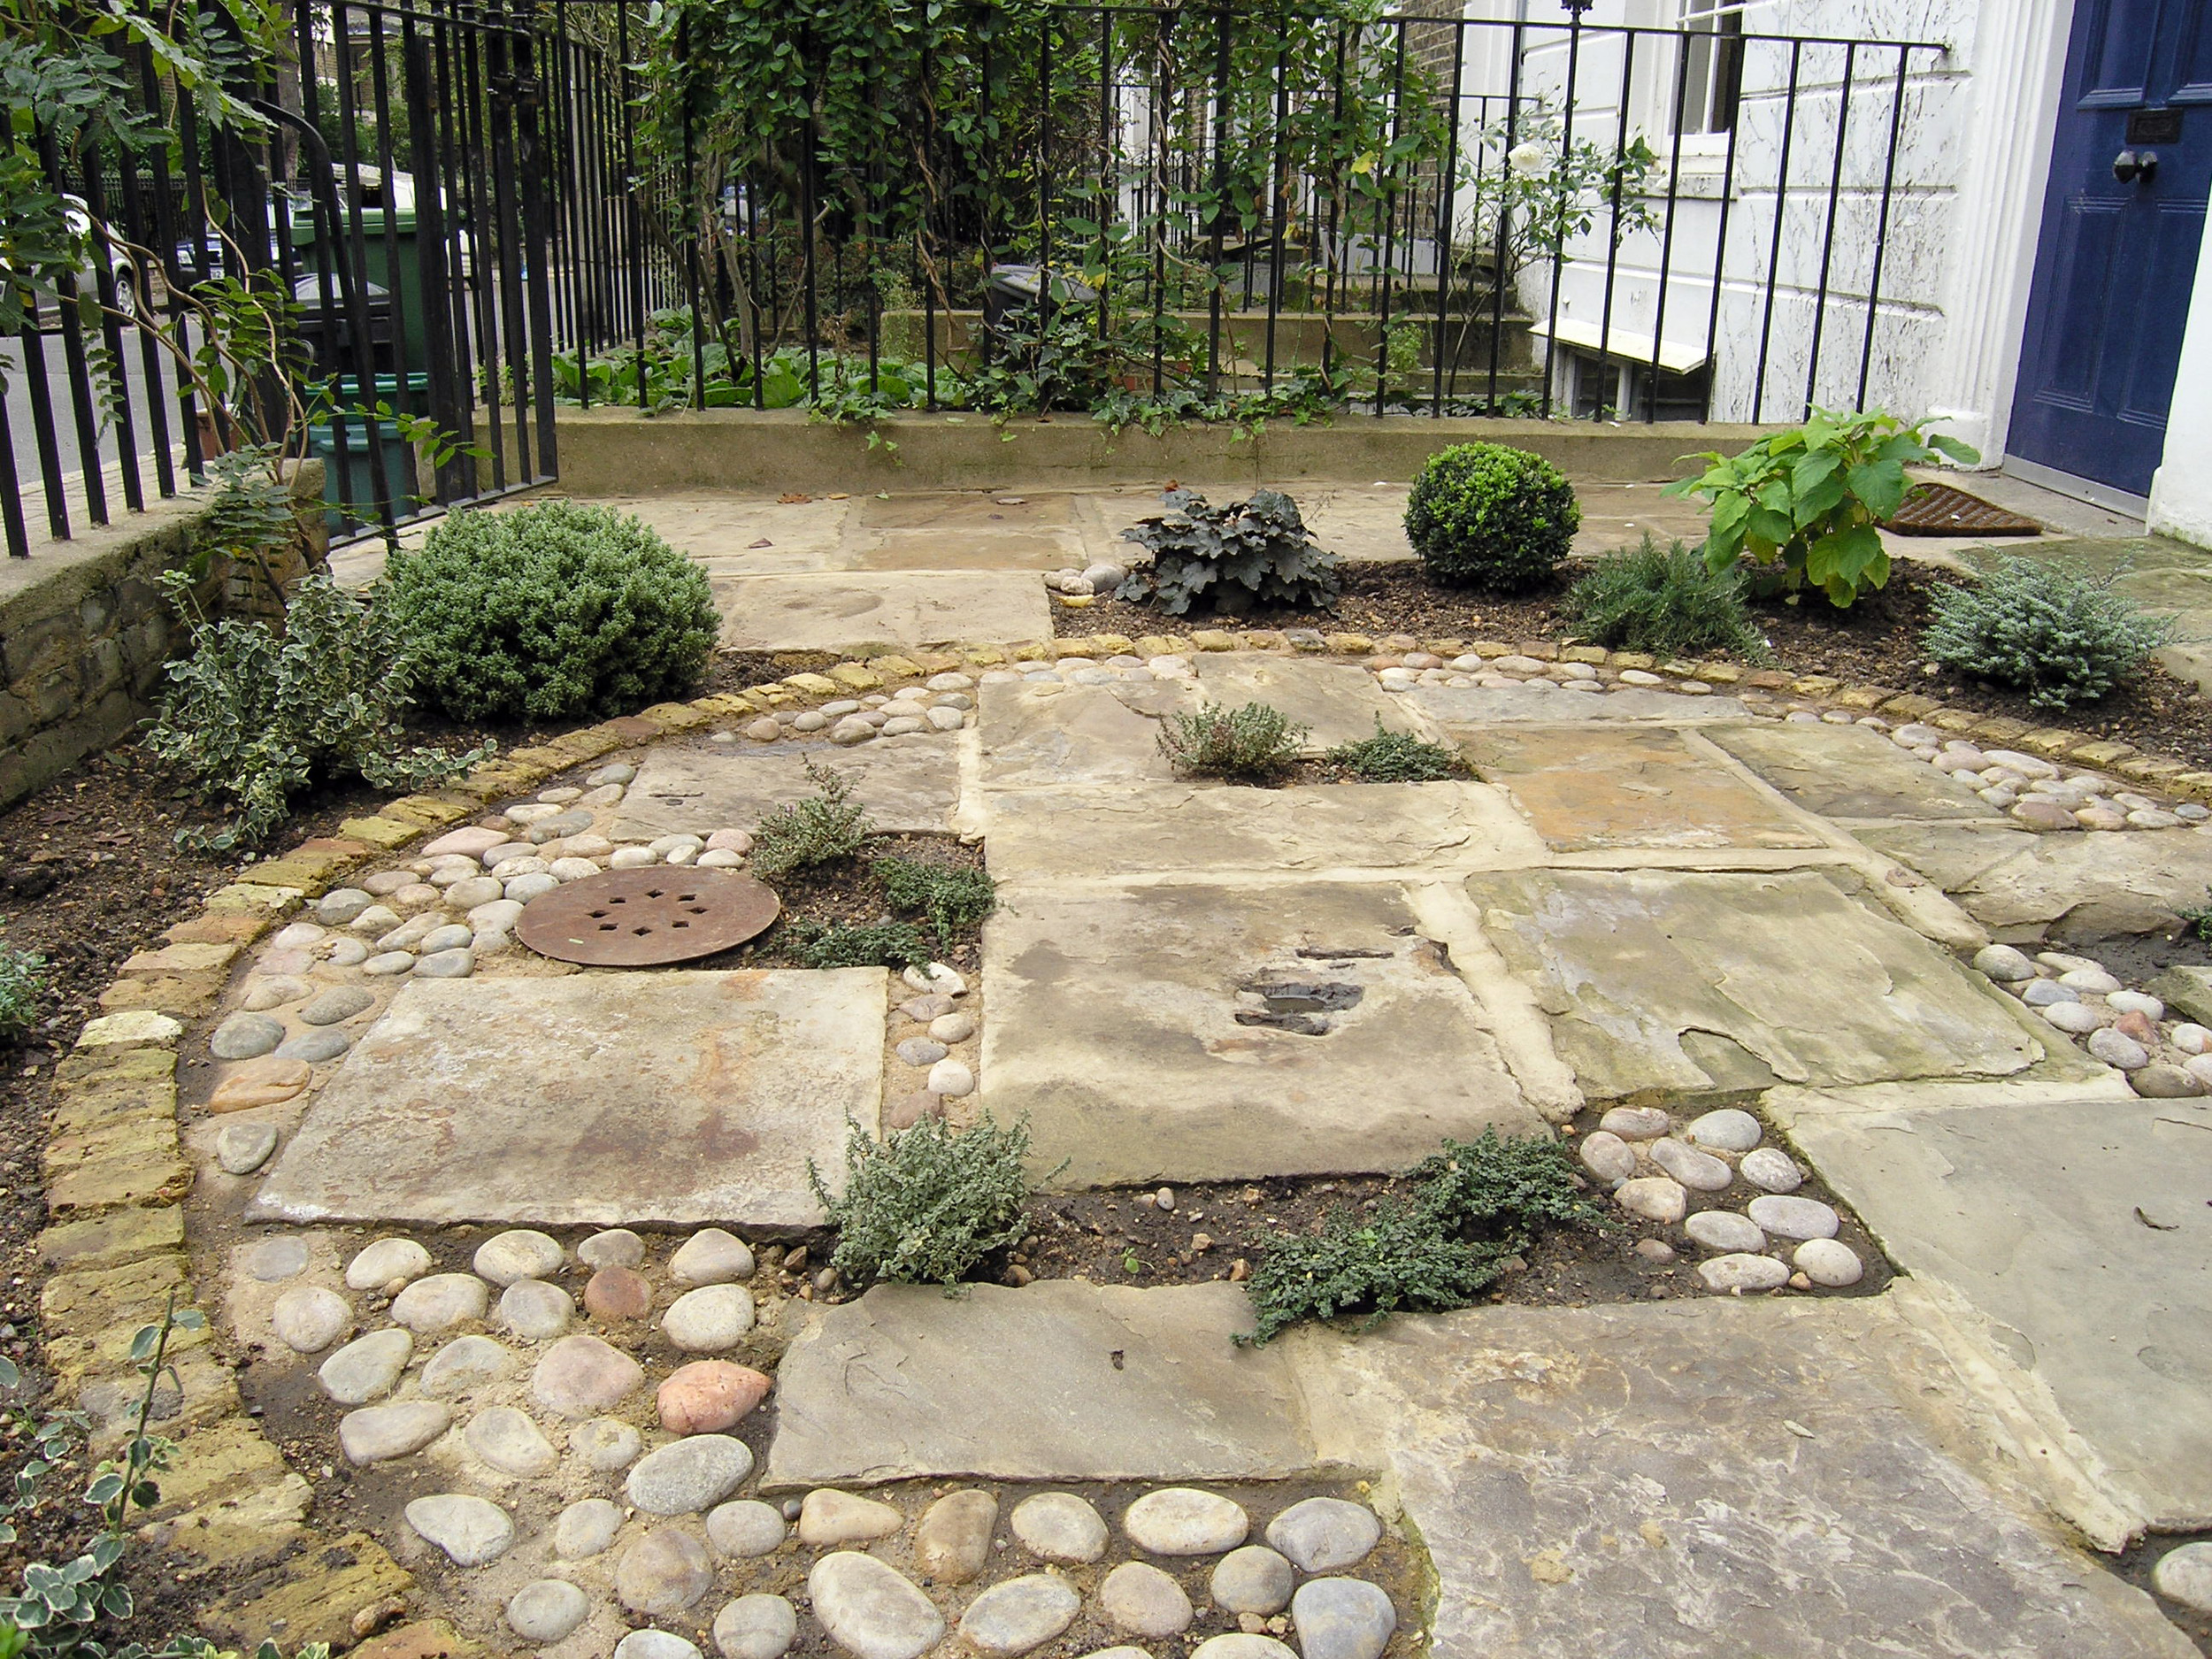 North London front garden with circular design of reclaimed Yorkstone